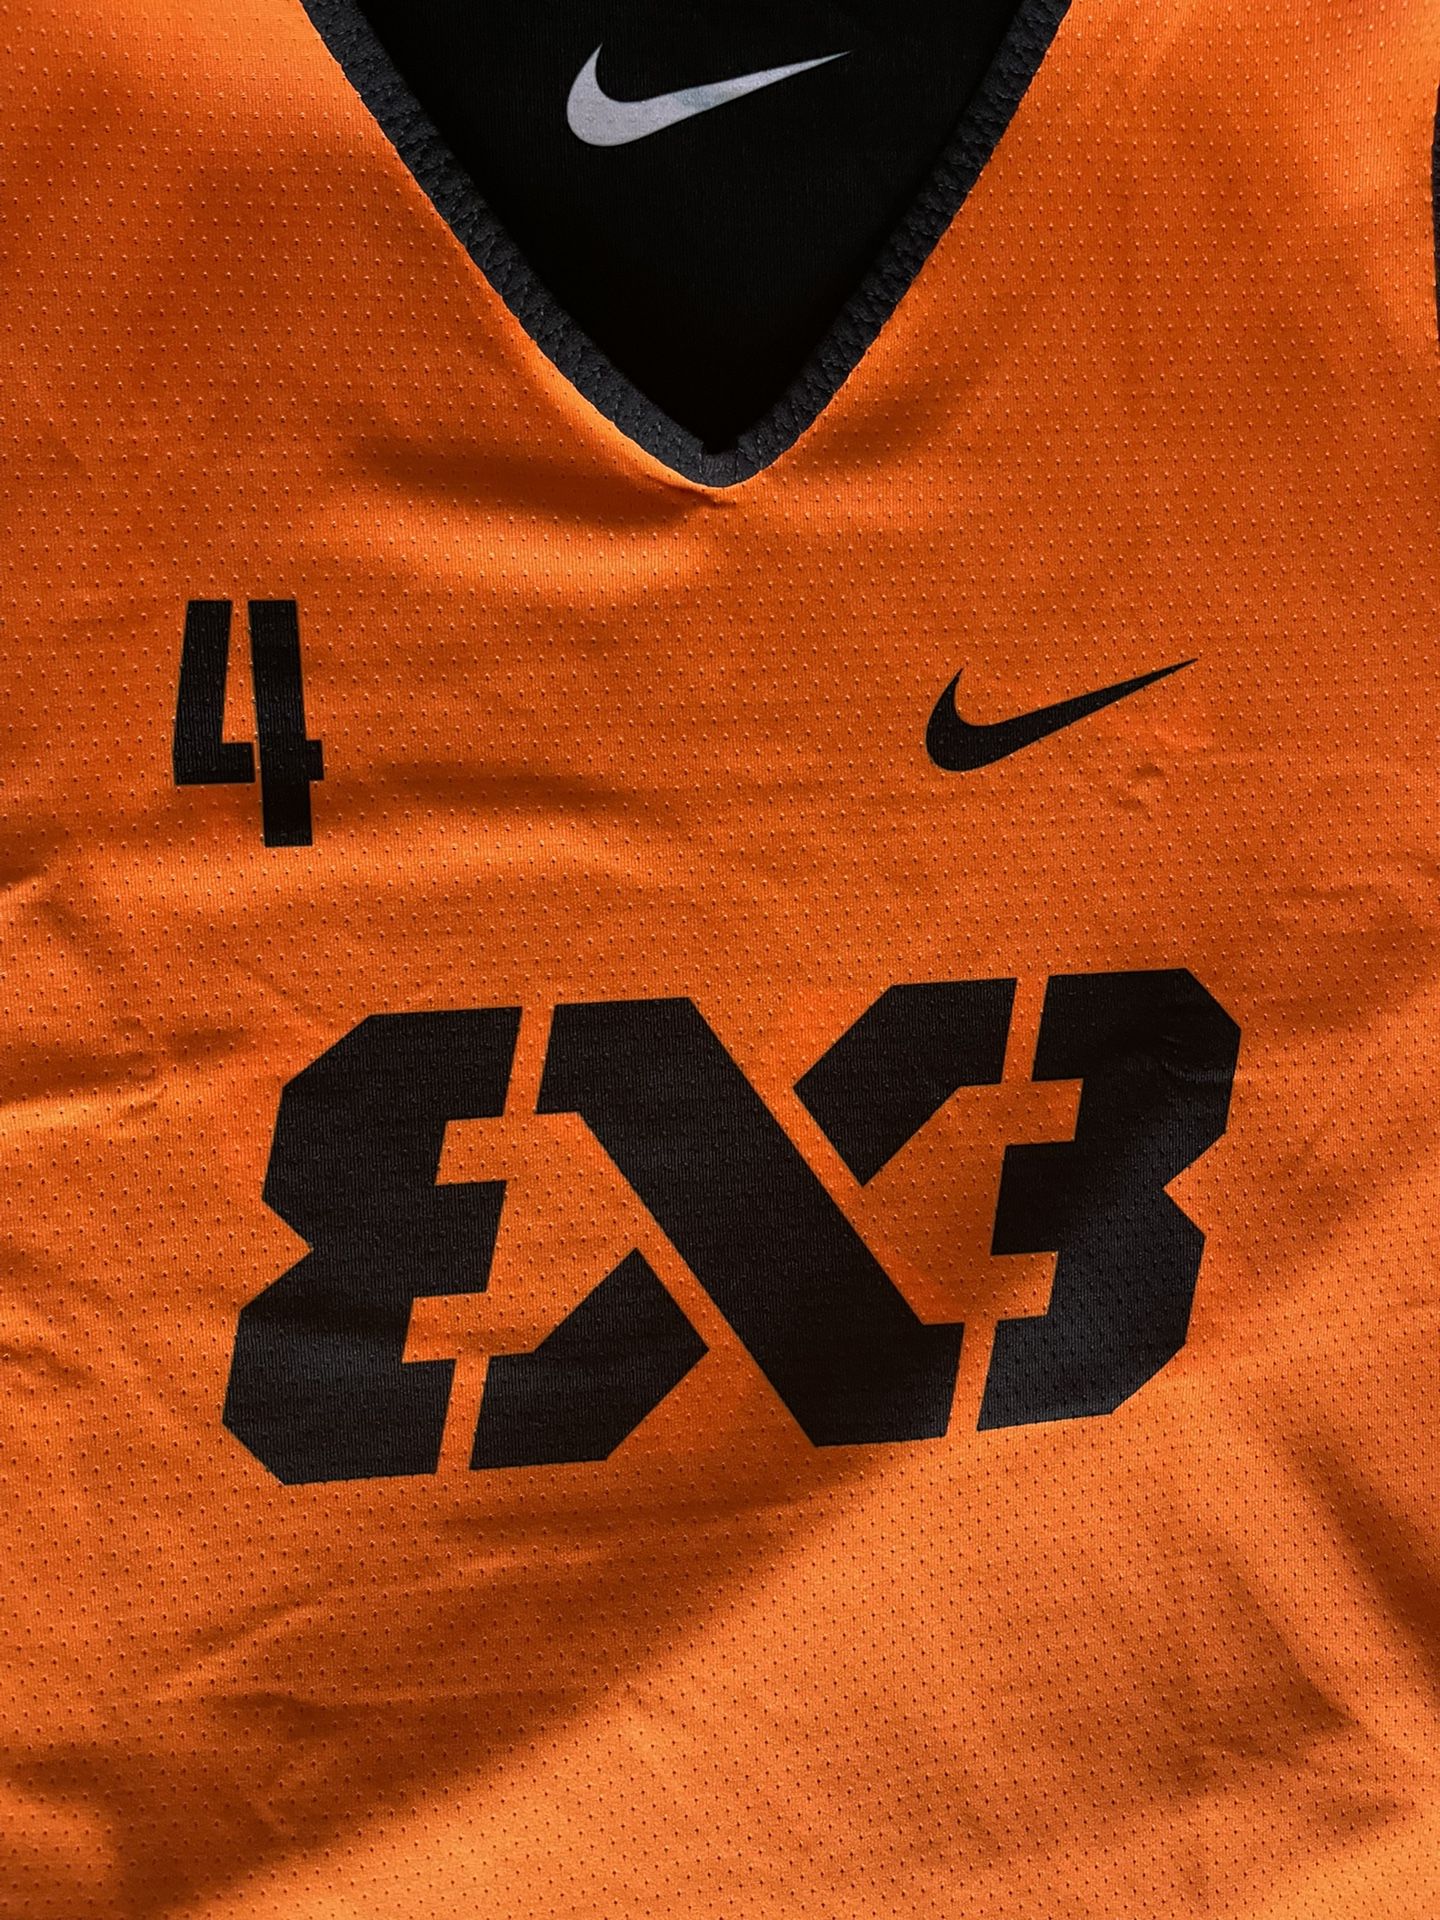 Nike+FIBA+3x3+Mens+Reversible+Basketball+Jersey+Sz+2xl+Tall+Made+in+USA+Olympics  for sale online